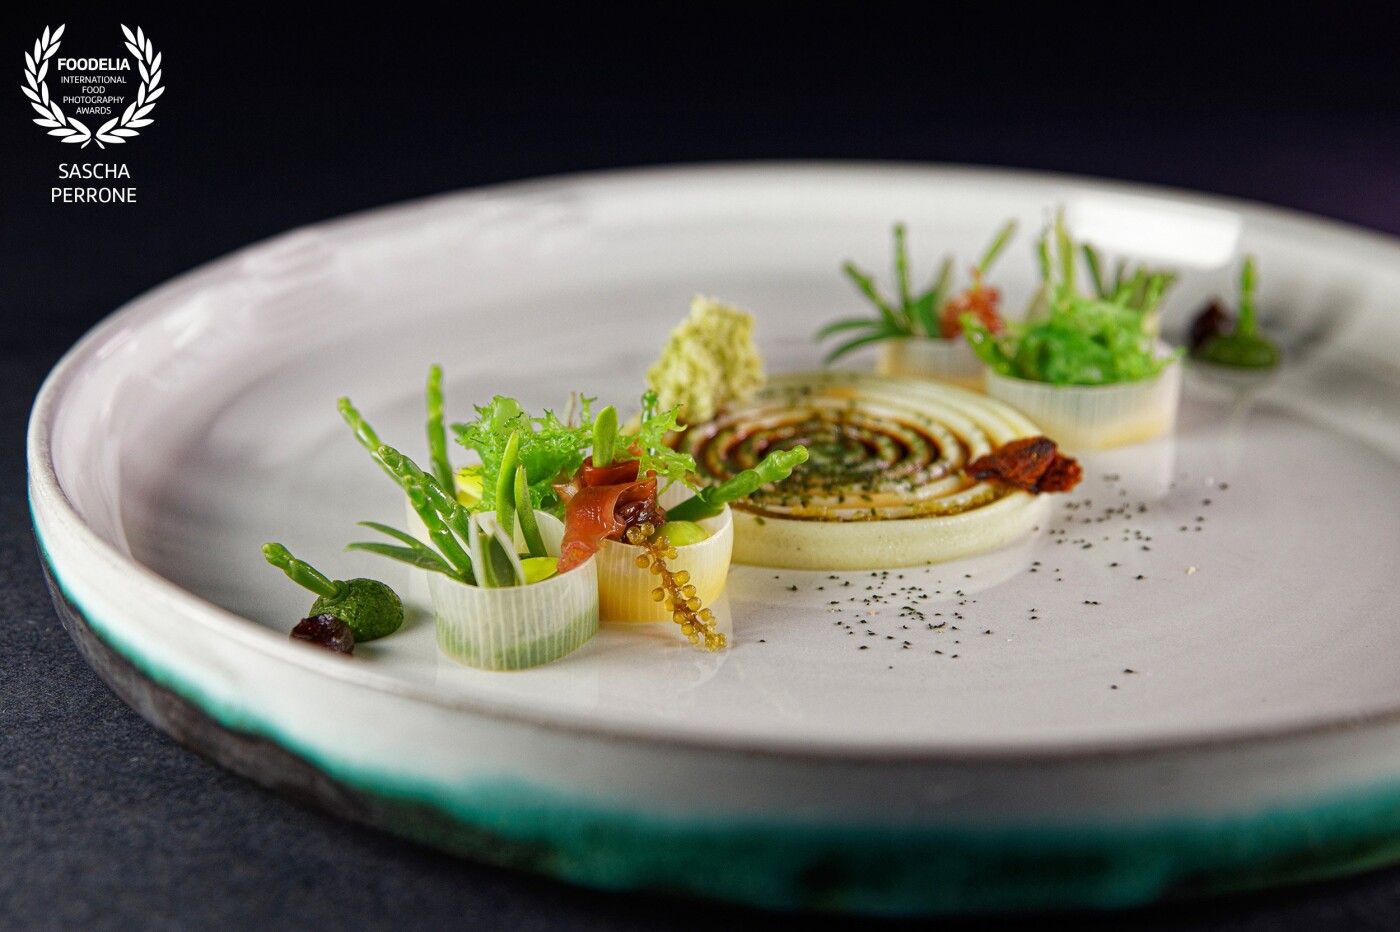 A creative dish from the "Flora" menu by chef Nils Henkel, one of the best chefs in Germany, which has been awarded two stars by the Michelin Guide in the Schwarzenstein restaurant. 